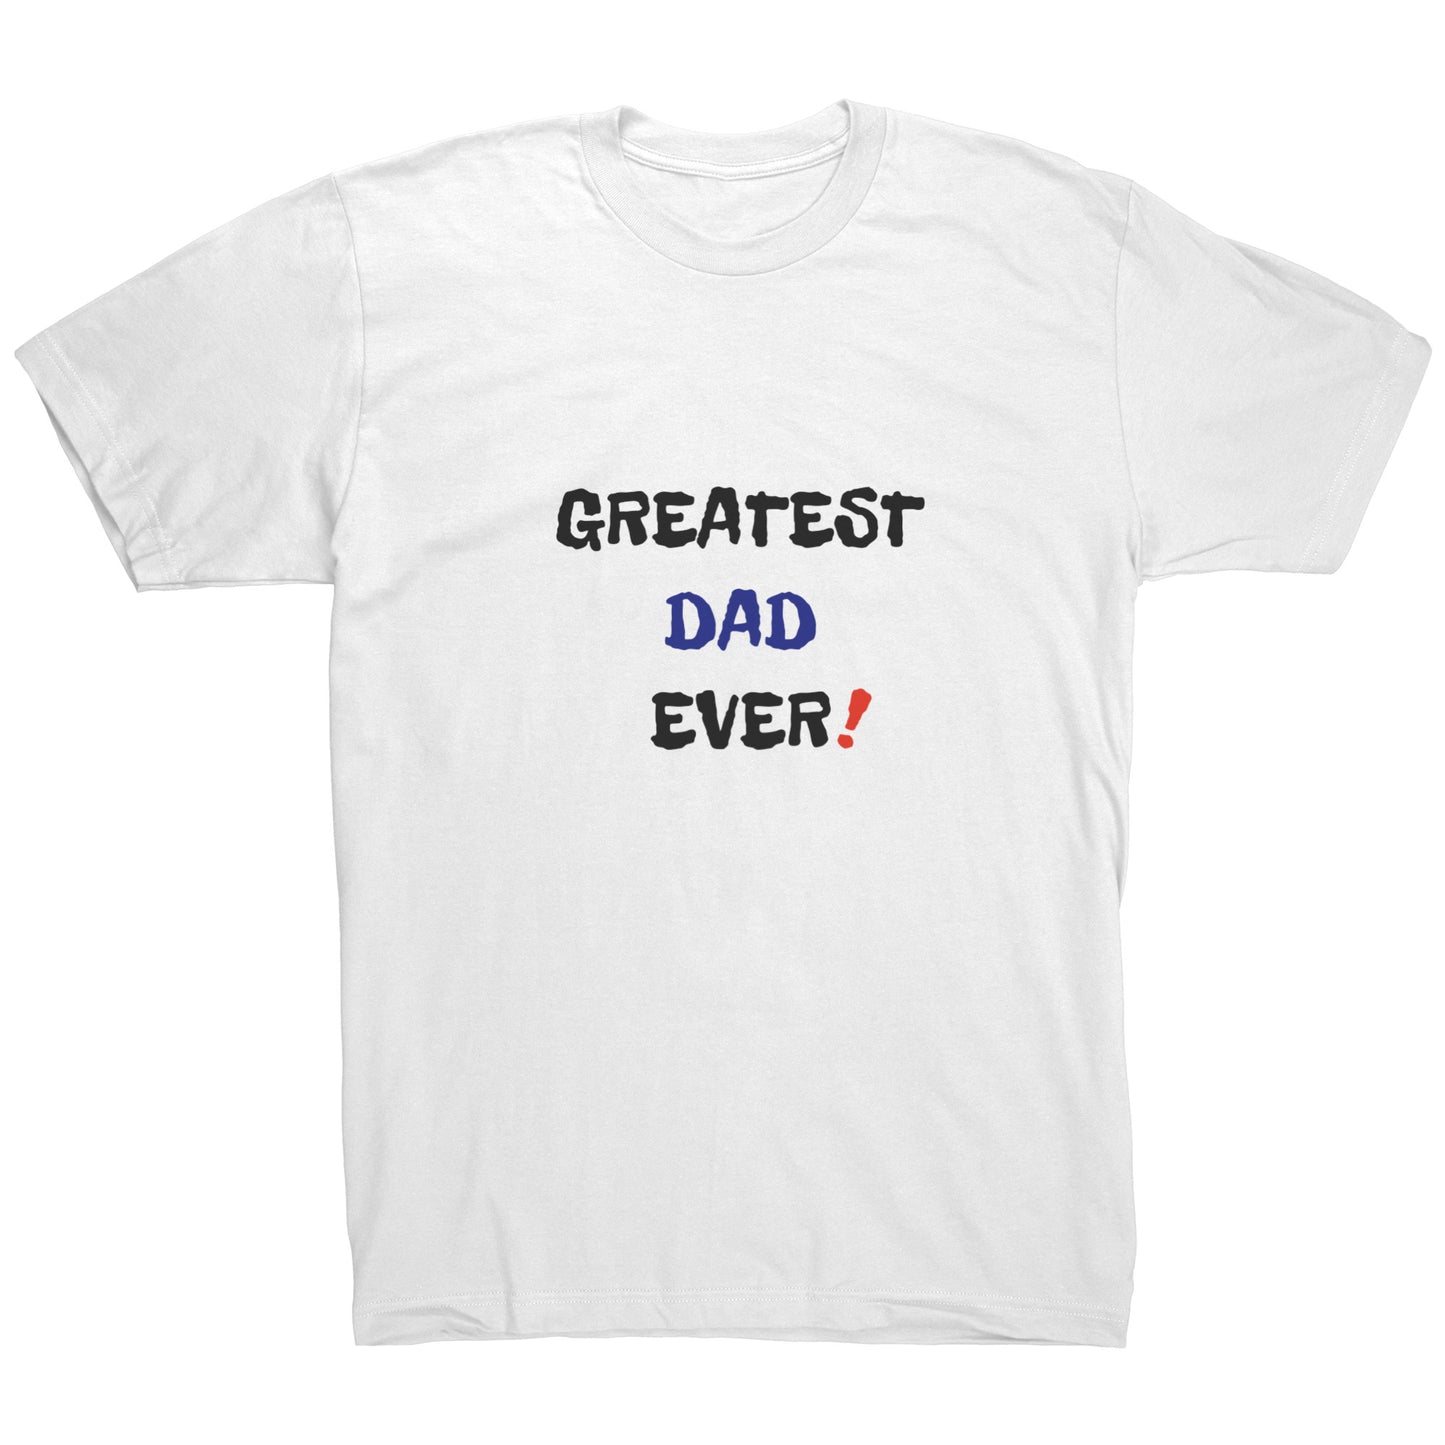 Celebrate Father's Day with the "Best Dad Ever" shirt available in various colors and sizes